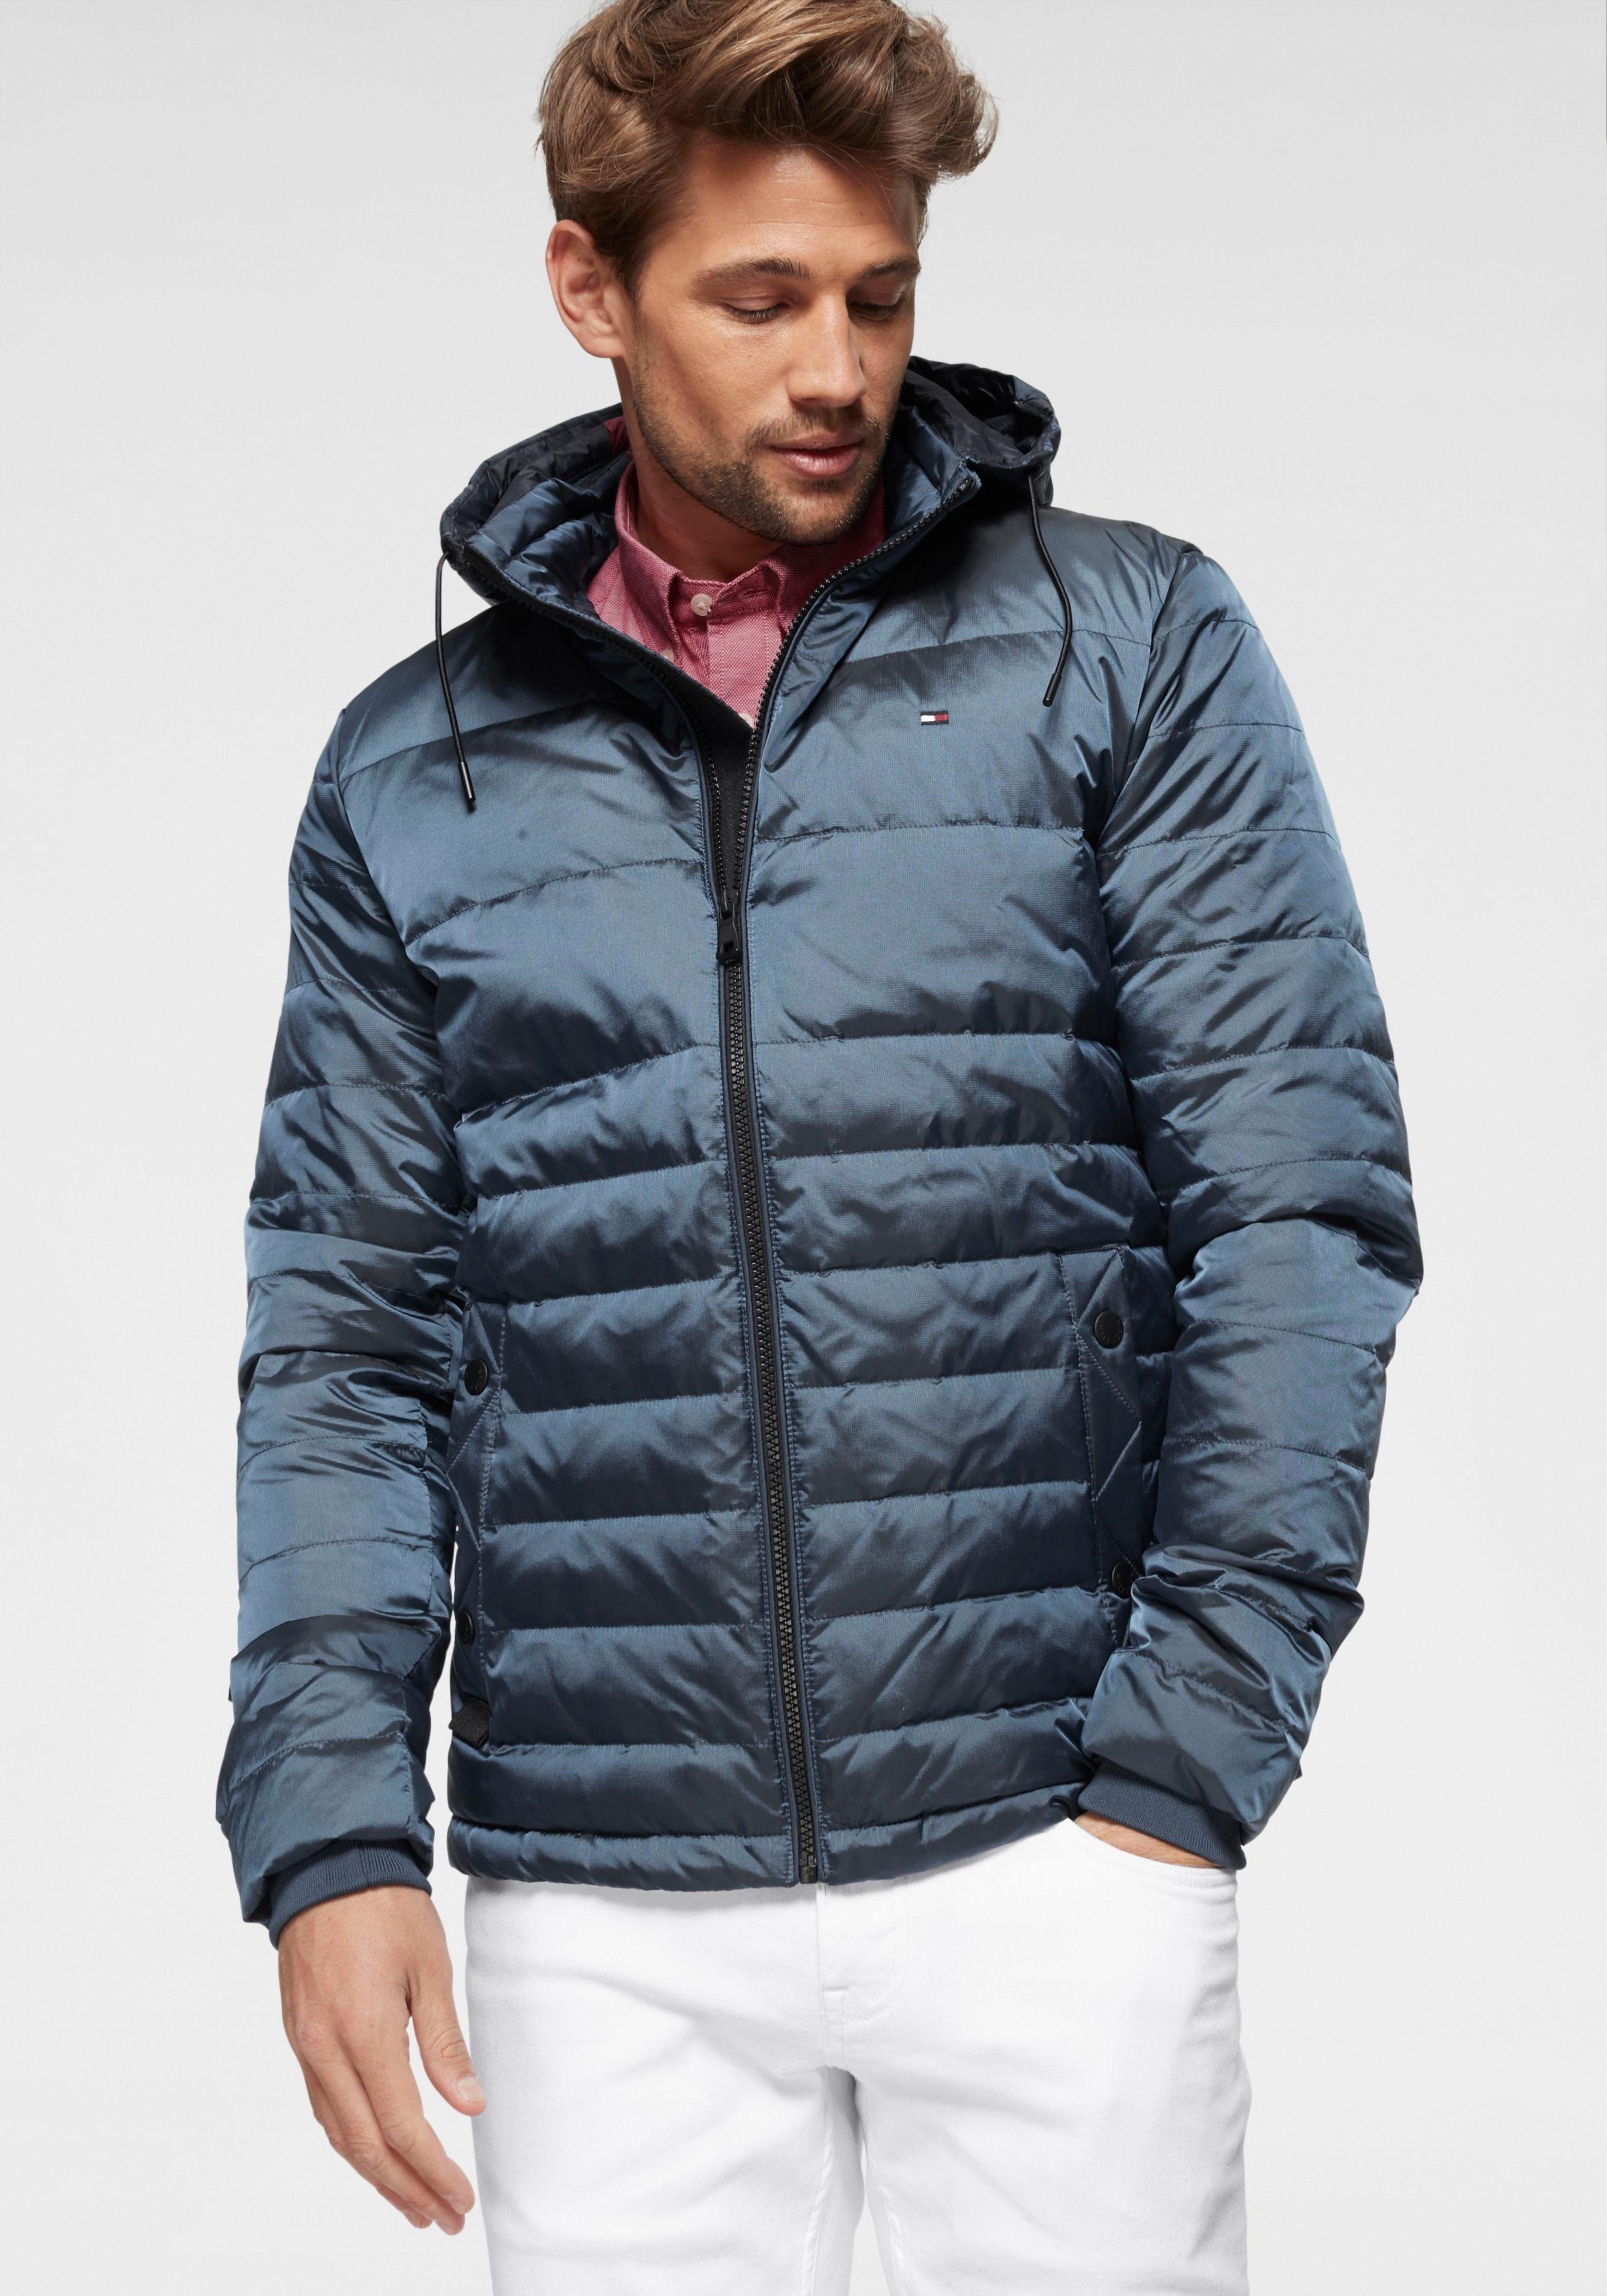 hilfiger two tone hooded bomber